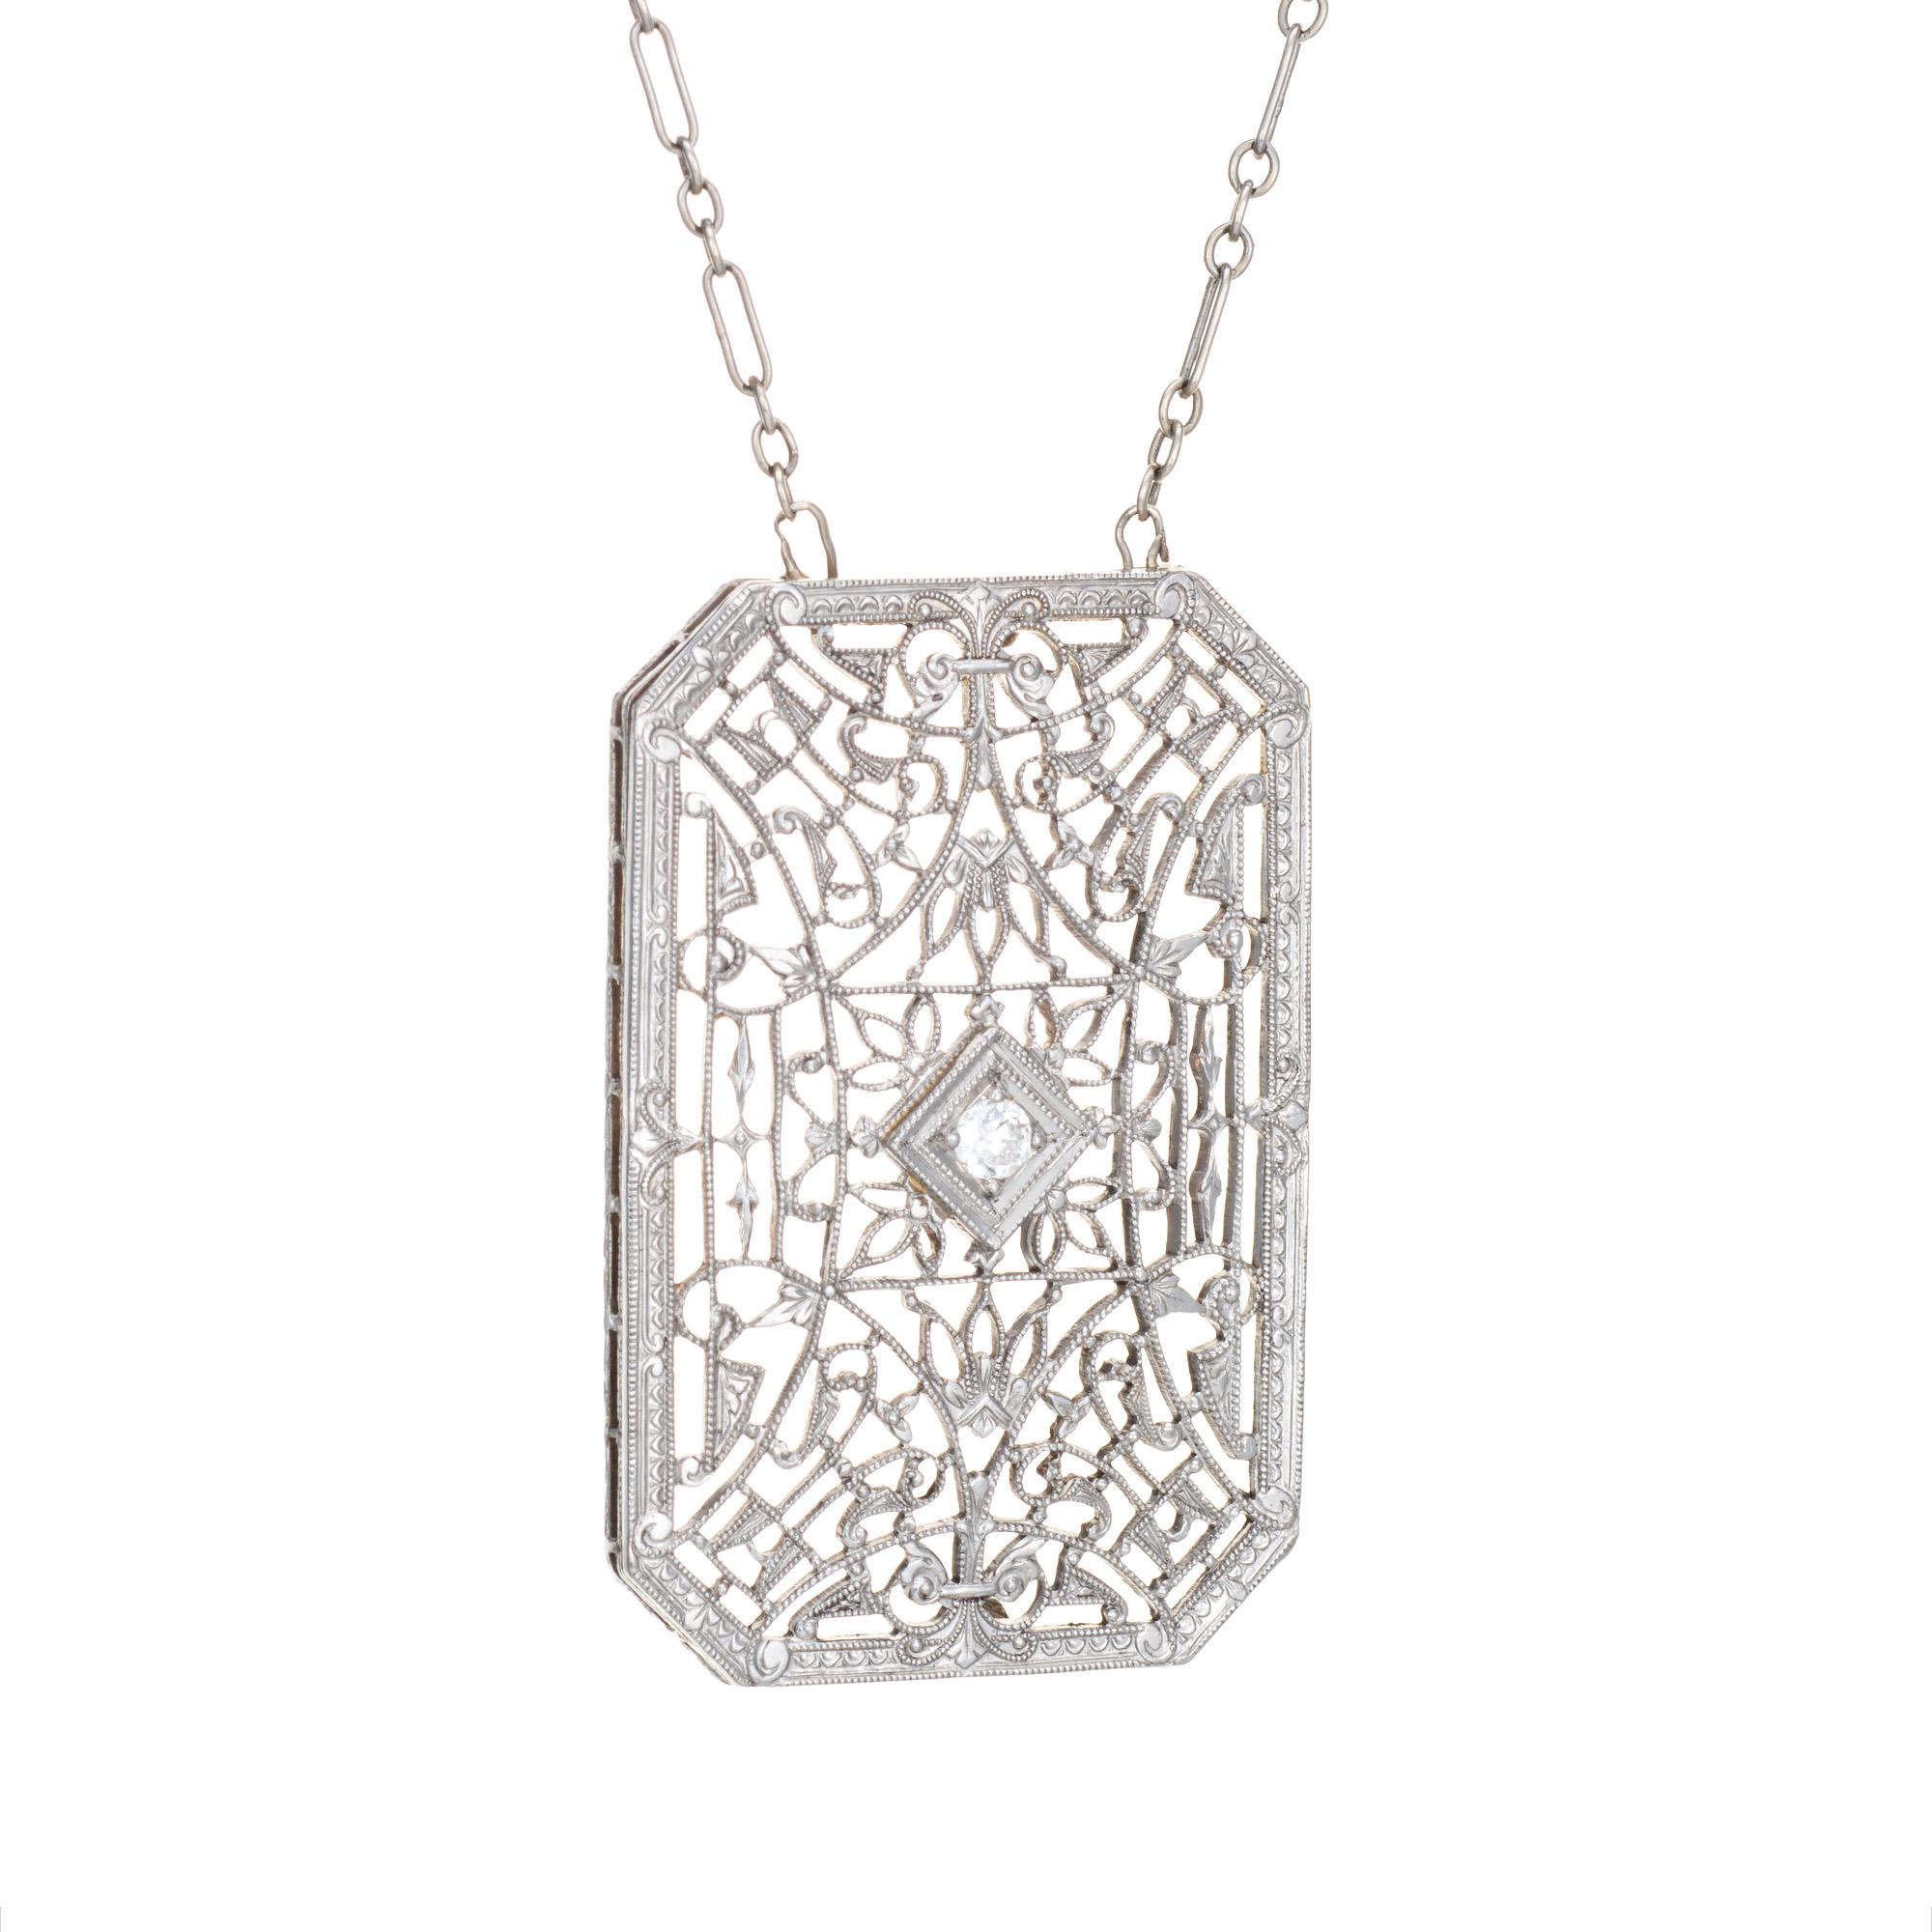 Finely detailed vintage Art Deco drop necklace (circa 1920s to 1930s), crafted in 14 karat white gold. 

The drop is set with an estimated 0.04 carat Old European cut diamond (estimated at H-I color and SI1 clarity).  

The die-struck necklace